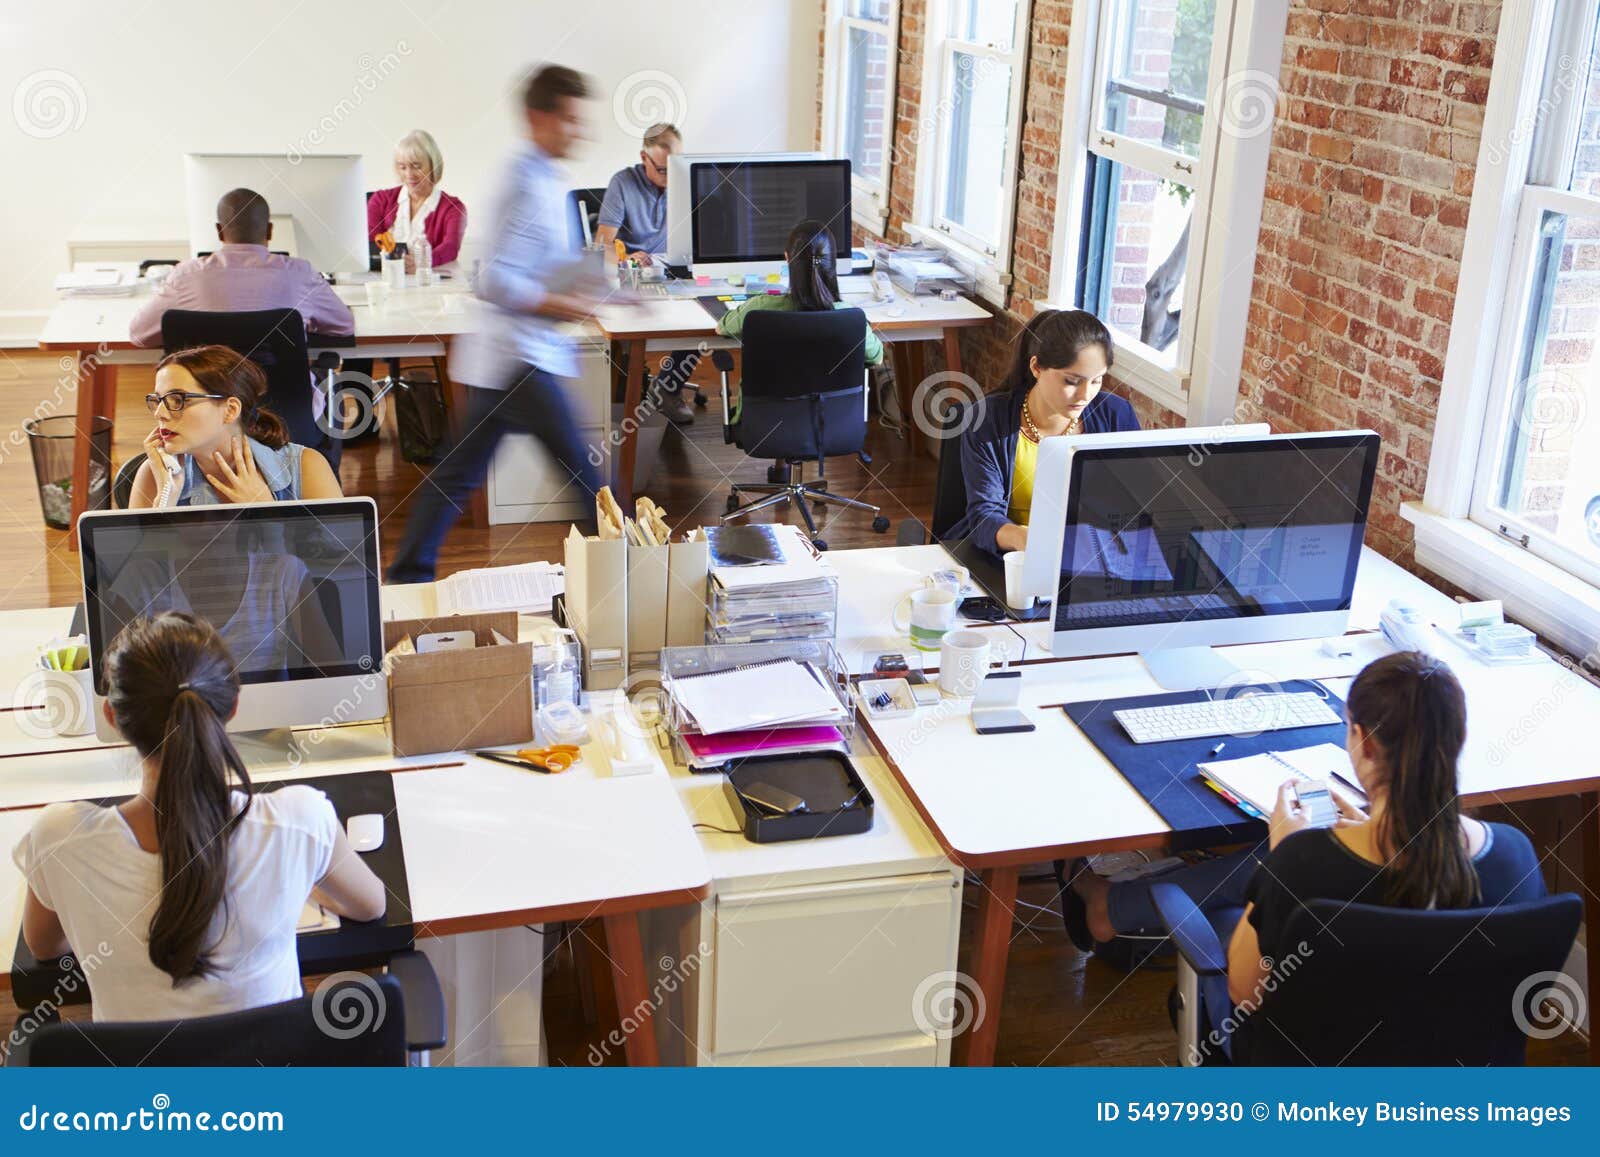 wide angle view of busy  office with workers at desks